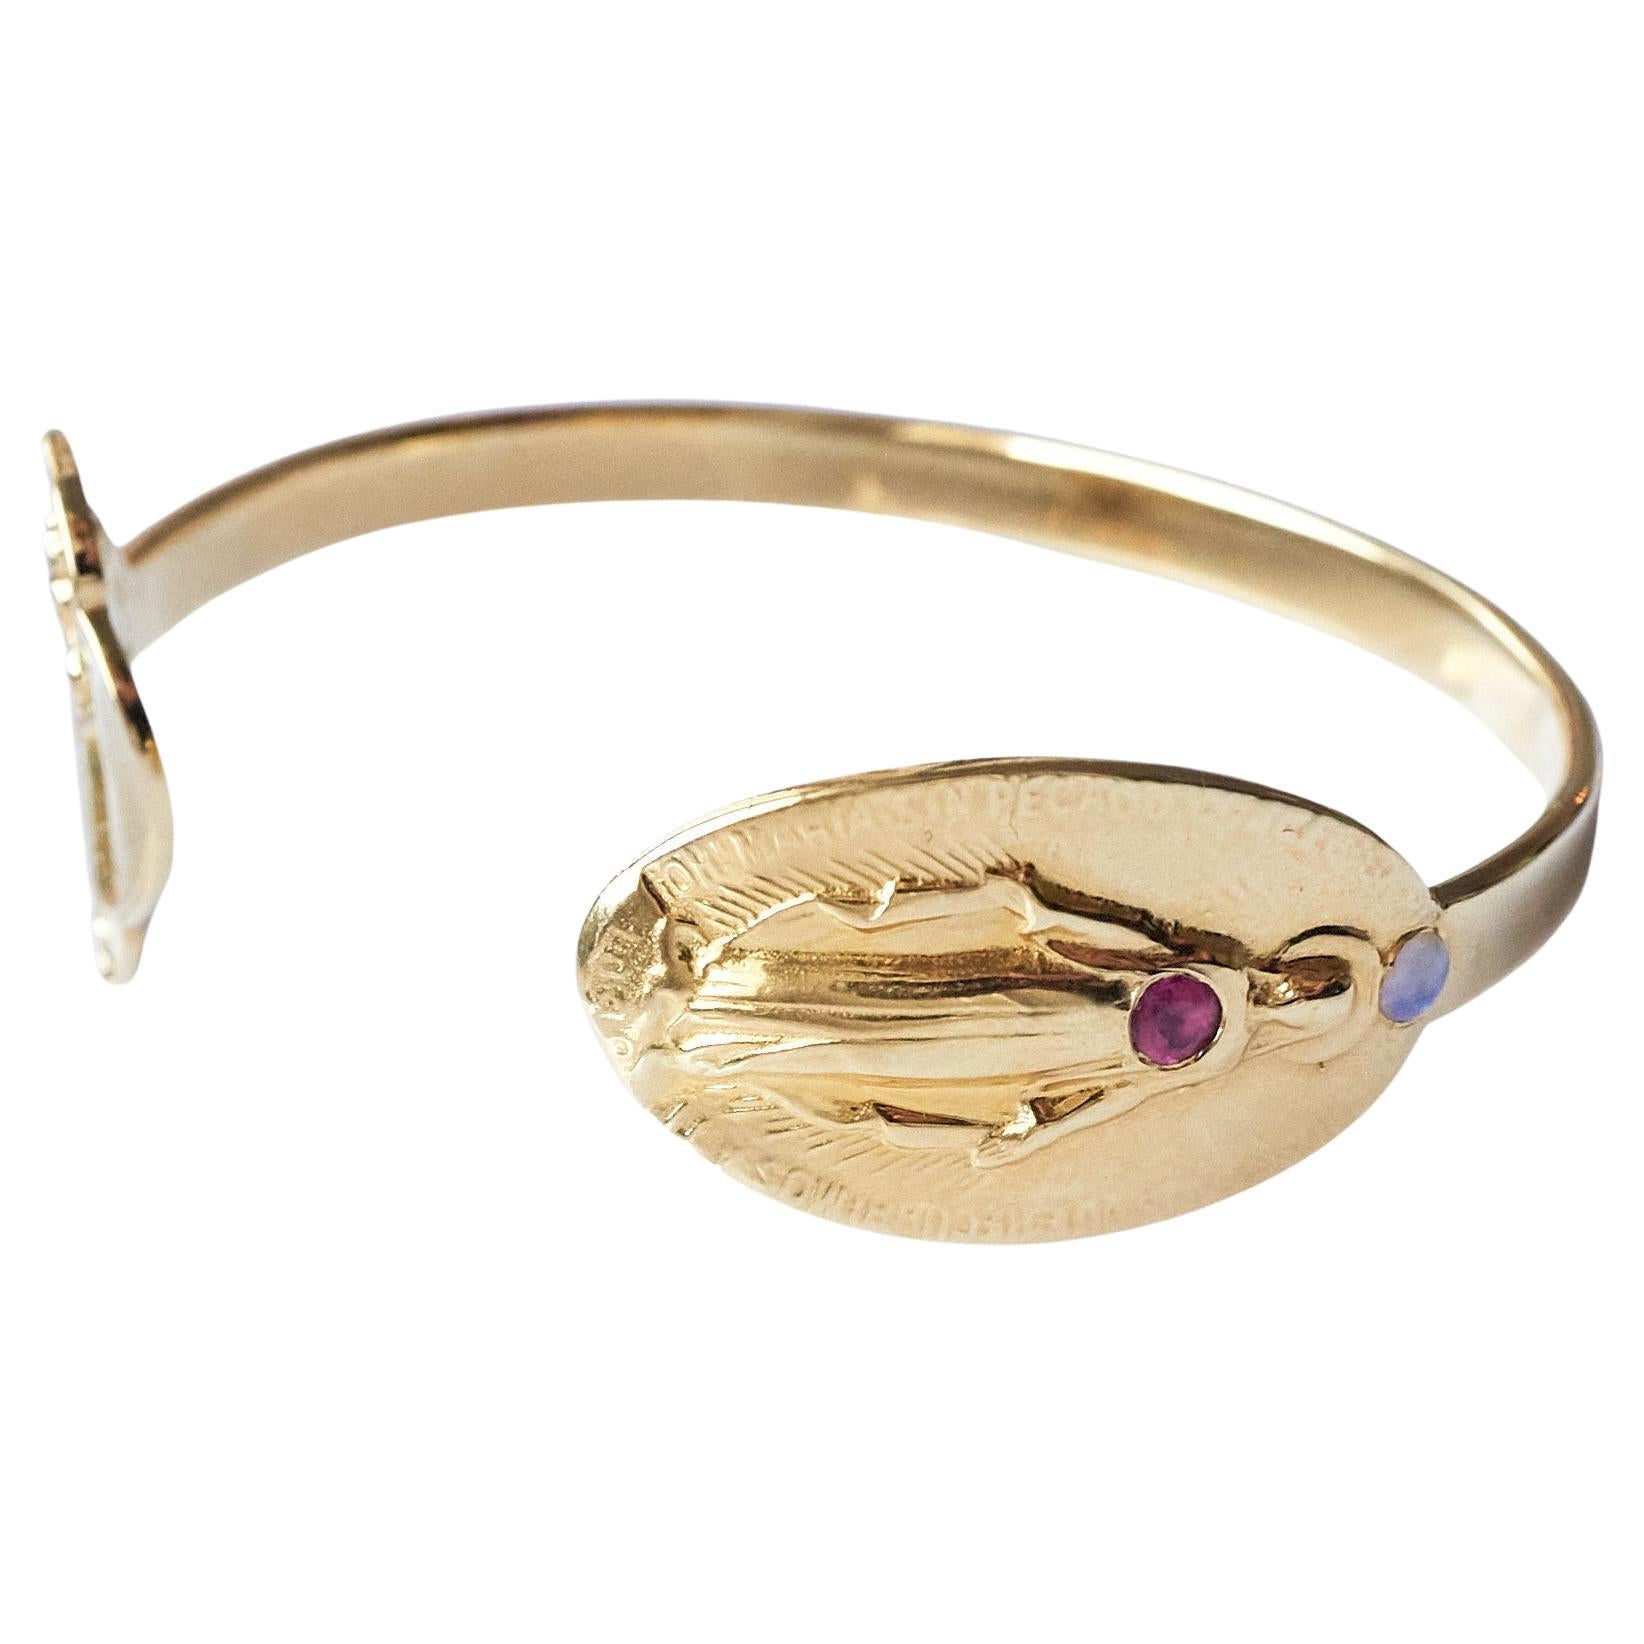 Virgin Mary With Pink Tourmaline set in the Heart and Opal above the head - The bracelet is open and has two medal on each side.
It is a Gold Plated Bracelet Cuff  Bangle 
Designer: J Dauphin


Symbols or medals can become a powerful tool in our